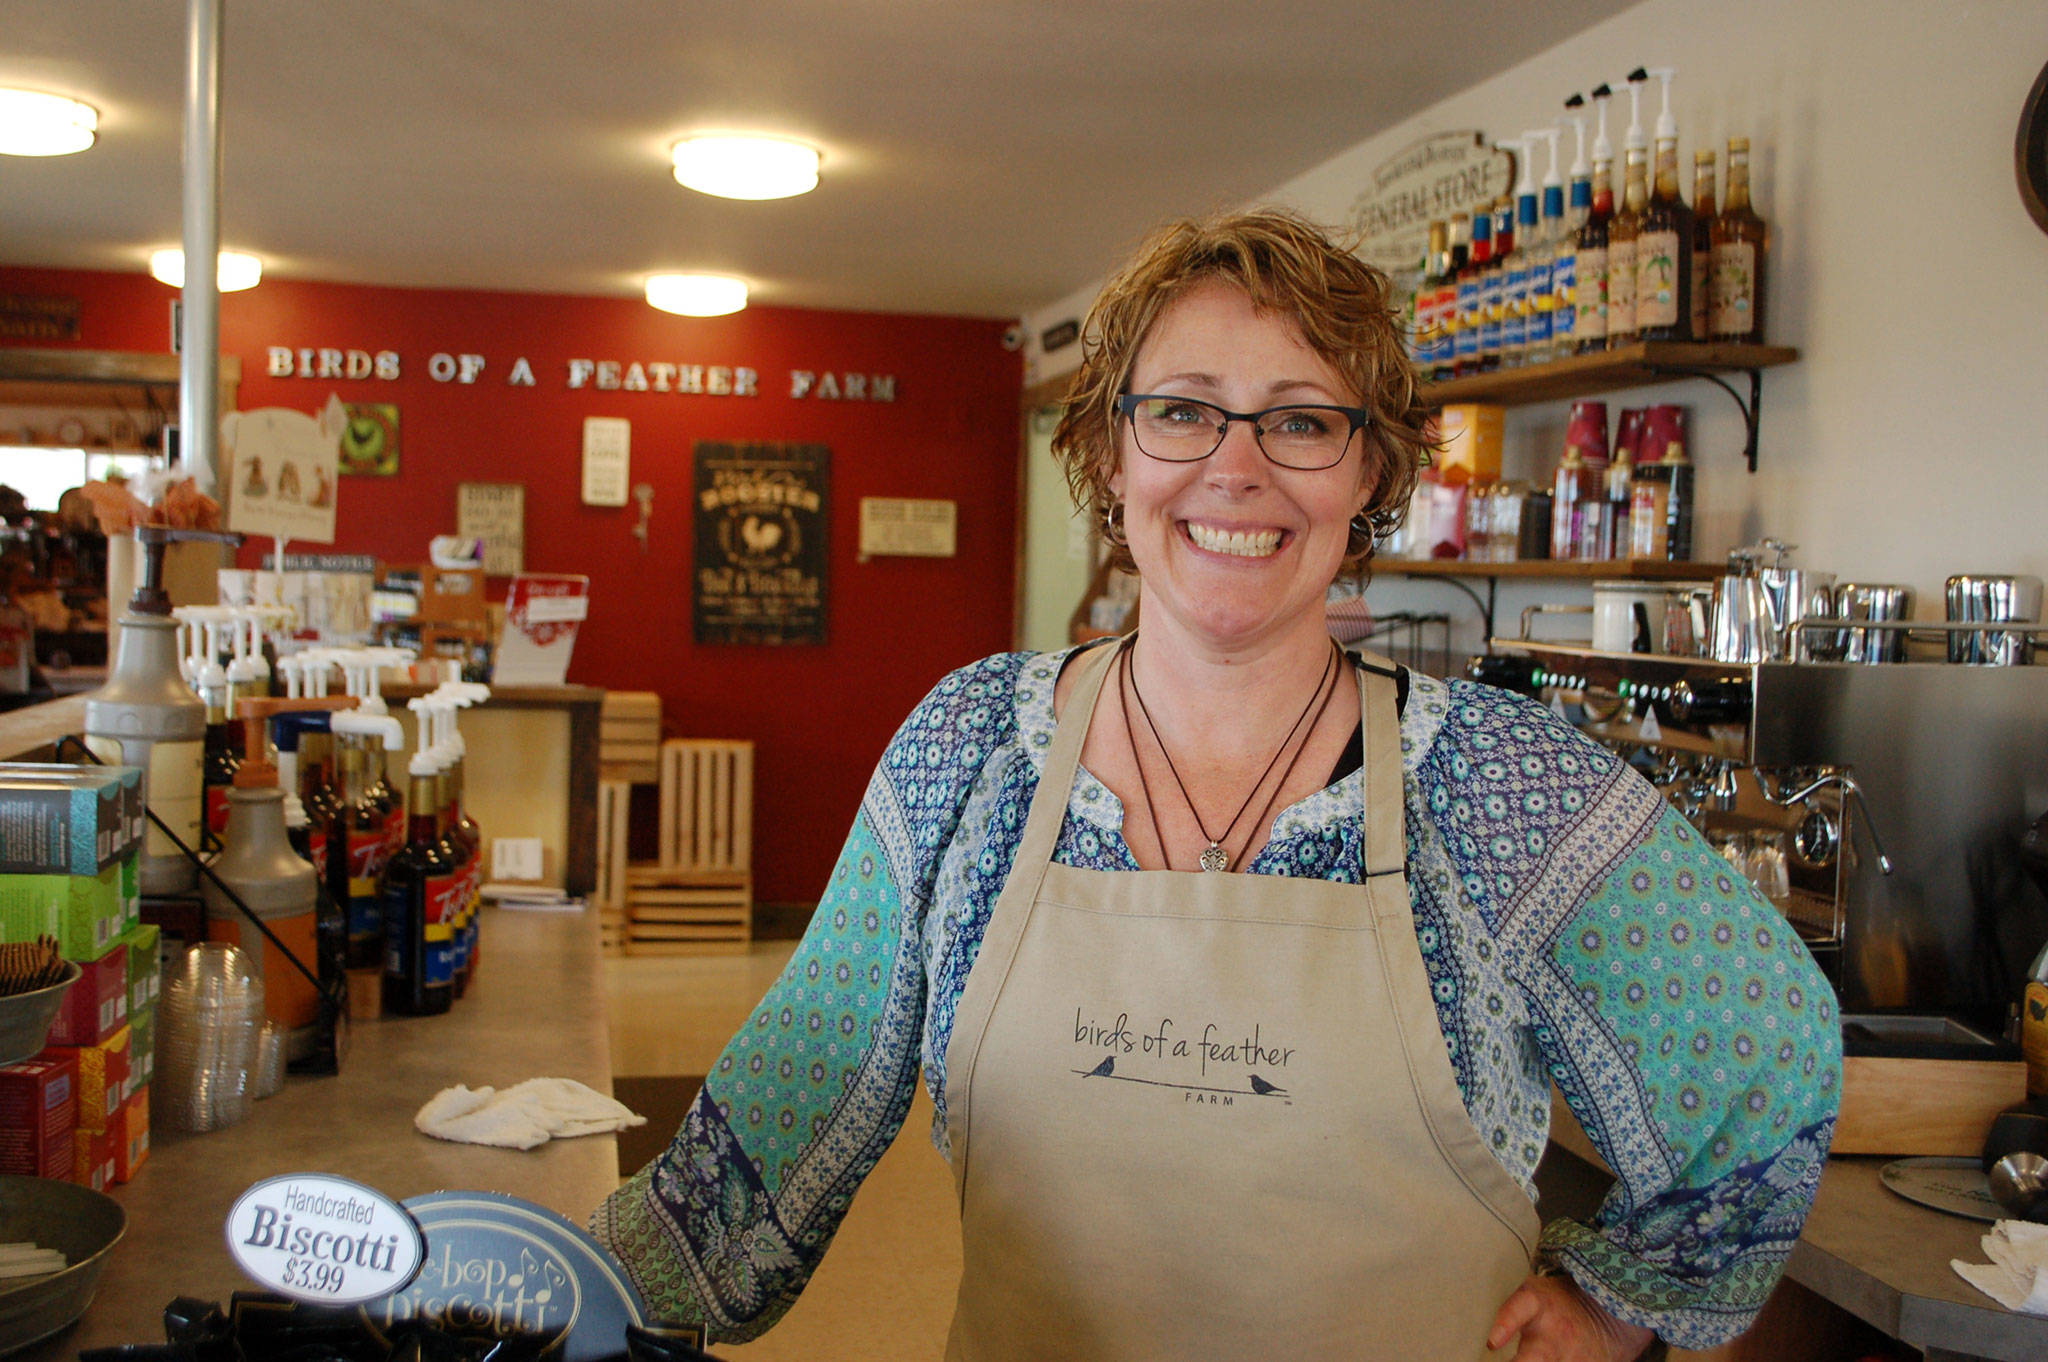 Kristi Grasser, owner of Birds of a Feather Farm stands in the renovated space that has been transformed from a business office into a coffee bar where her business will now offer organic coffee and all-natural ice cream. Sequim Gazette photo by Erin Hawkins